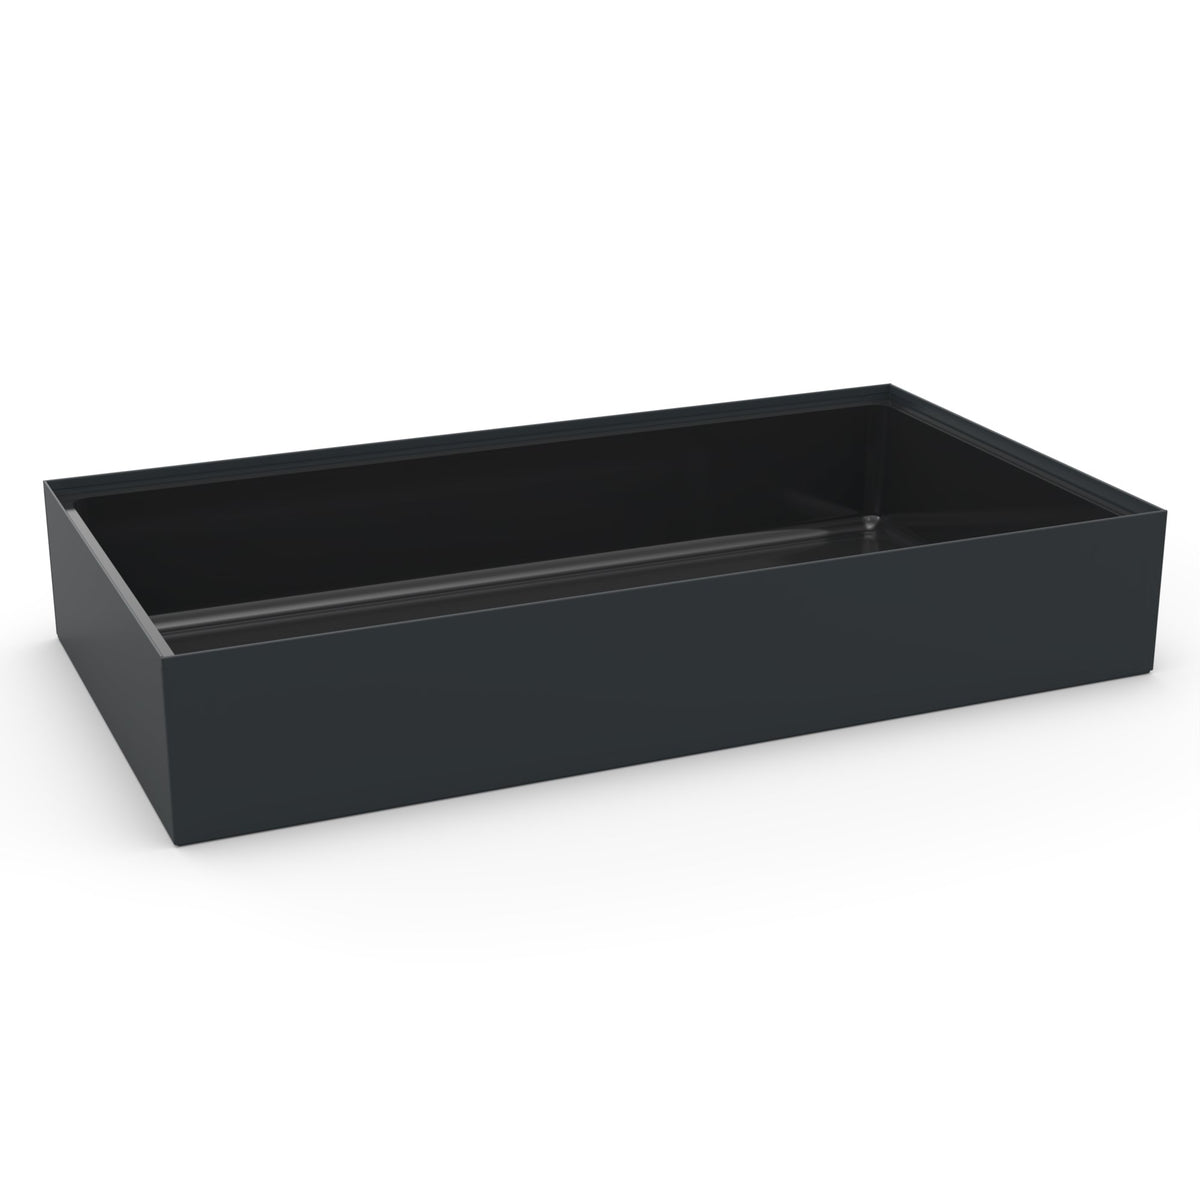 Planter Box with Liner 80cm